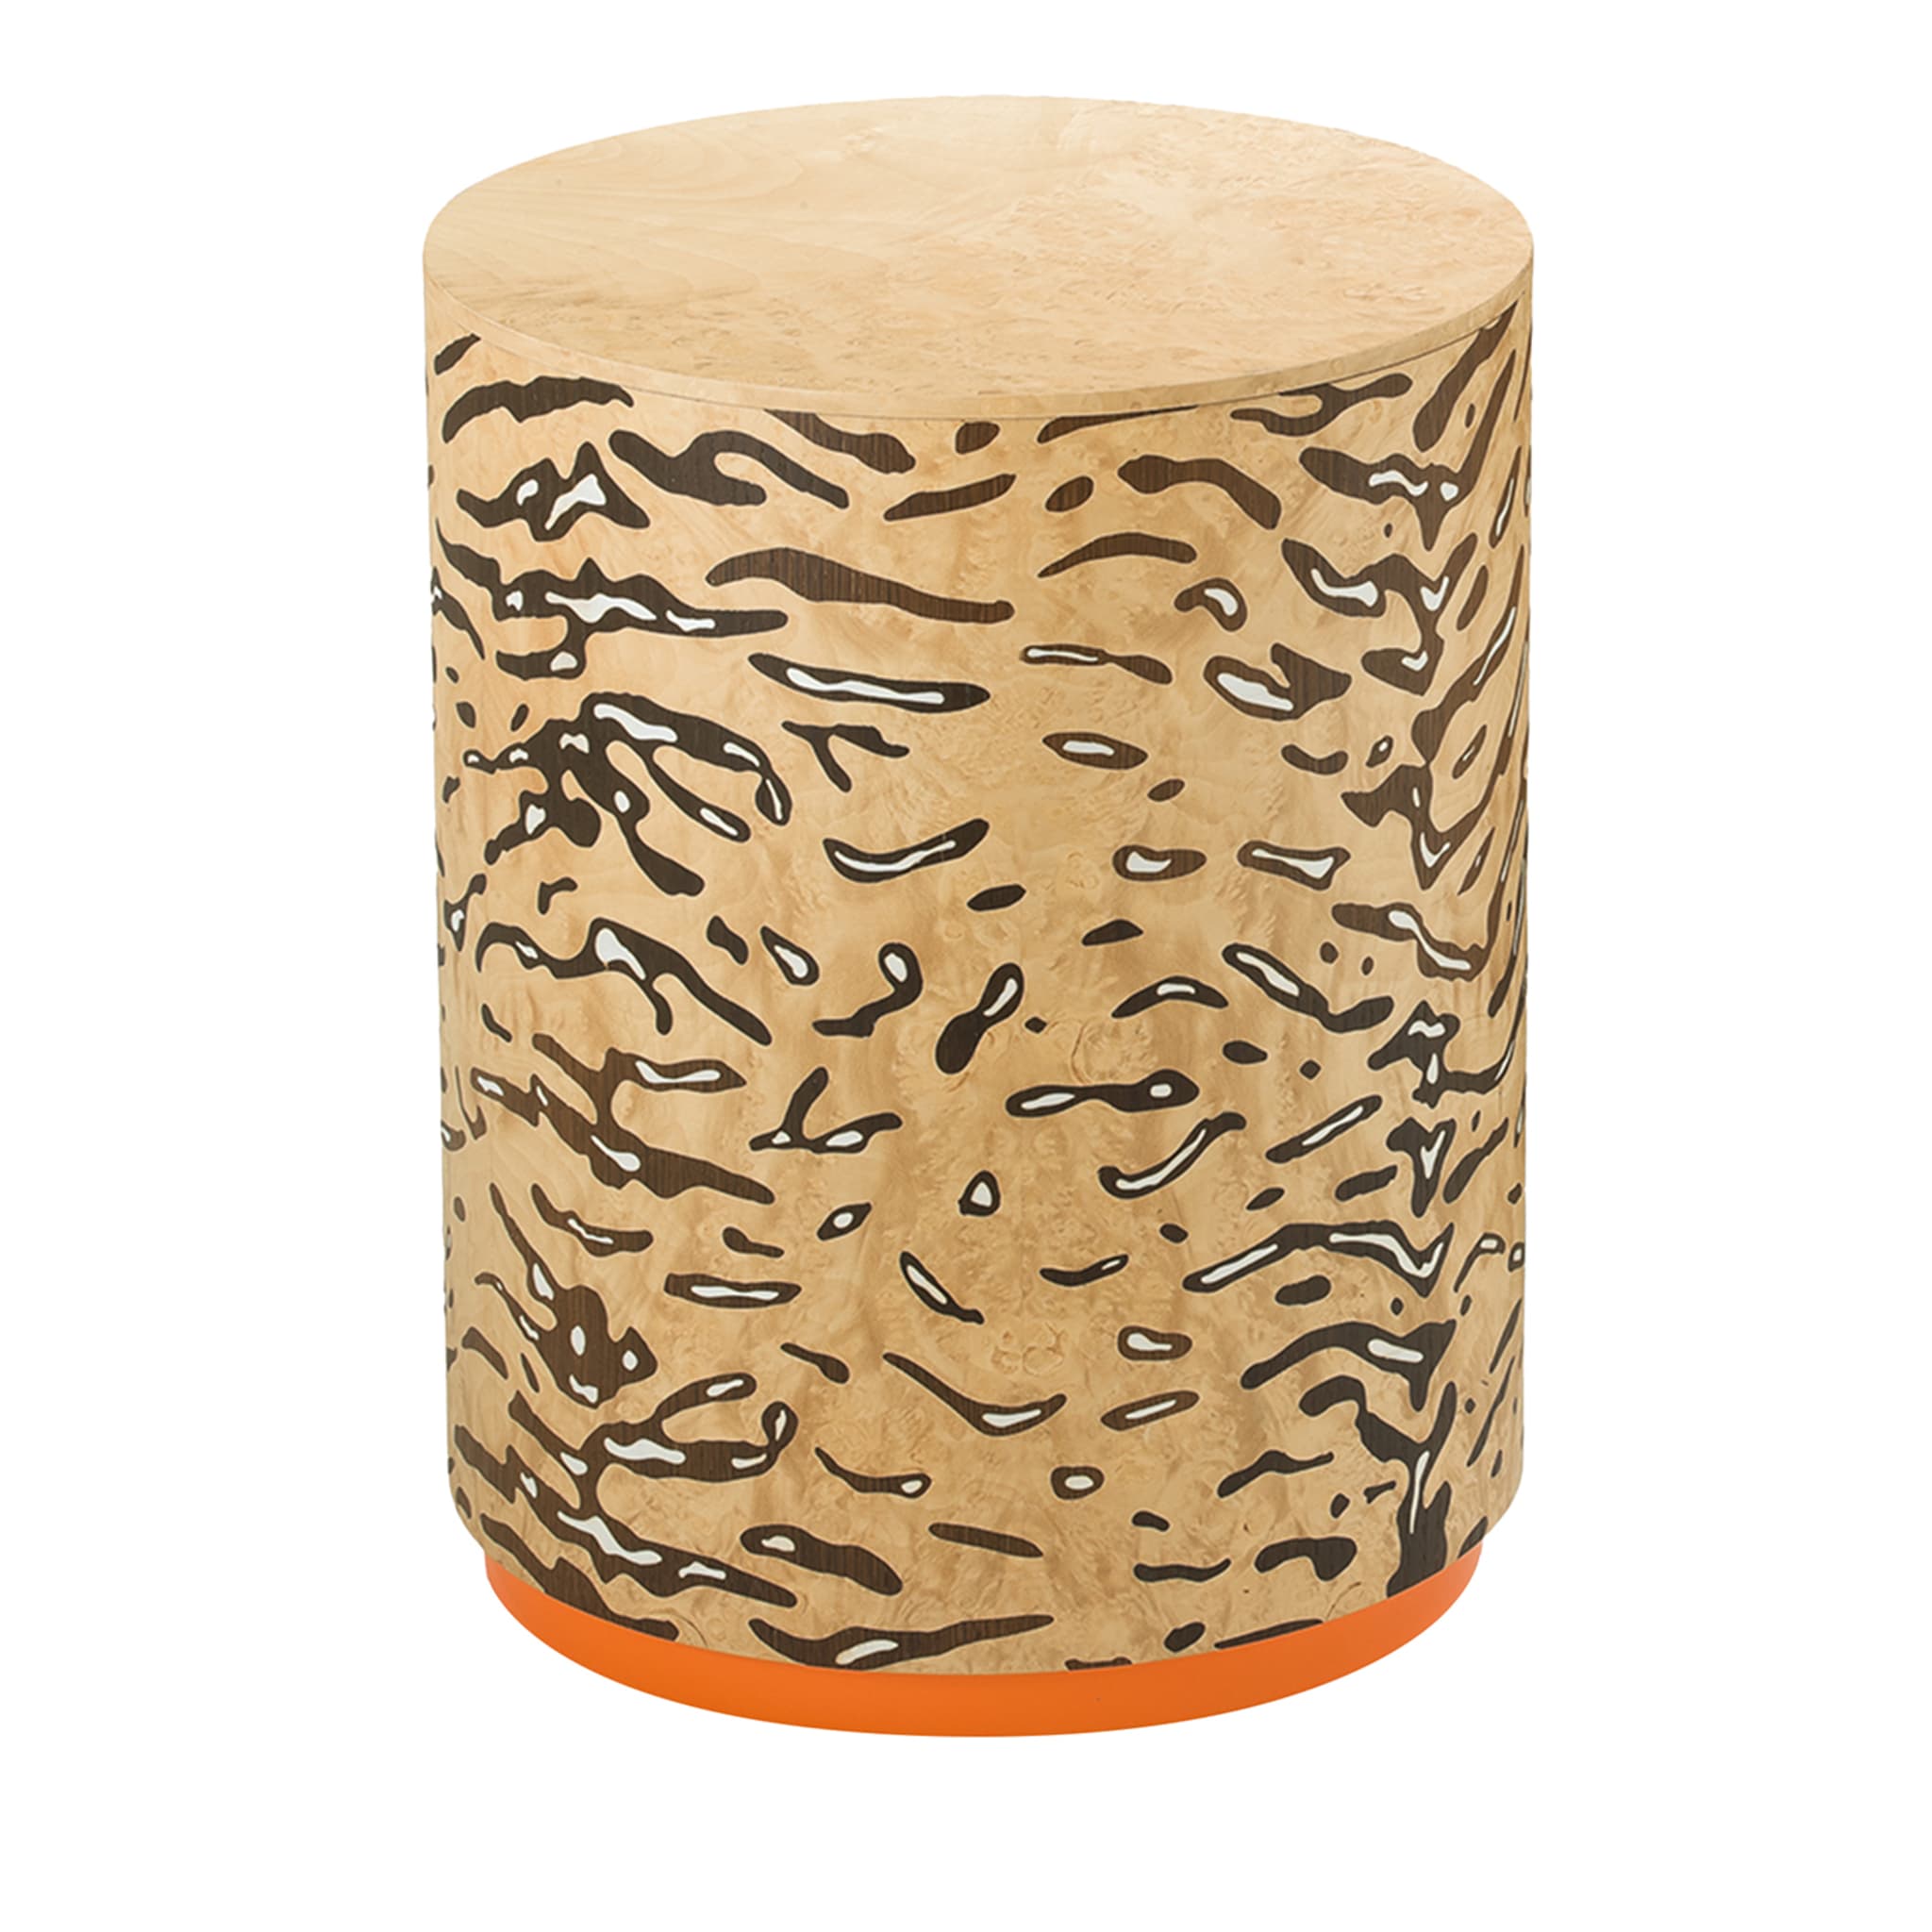 Triboo Tiger Cylindrical Stool by Lorenza Bozzoli - Main view